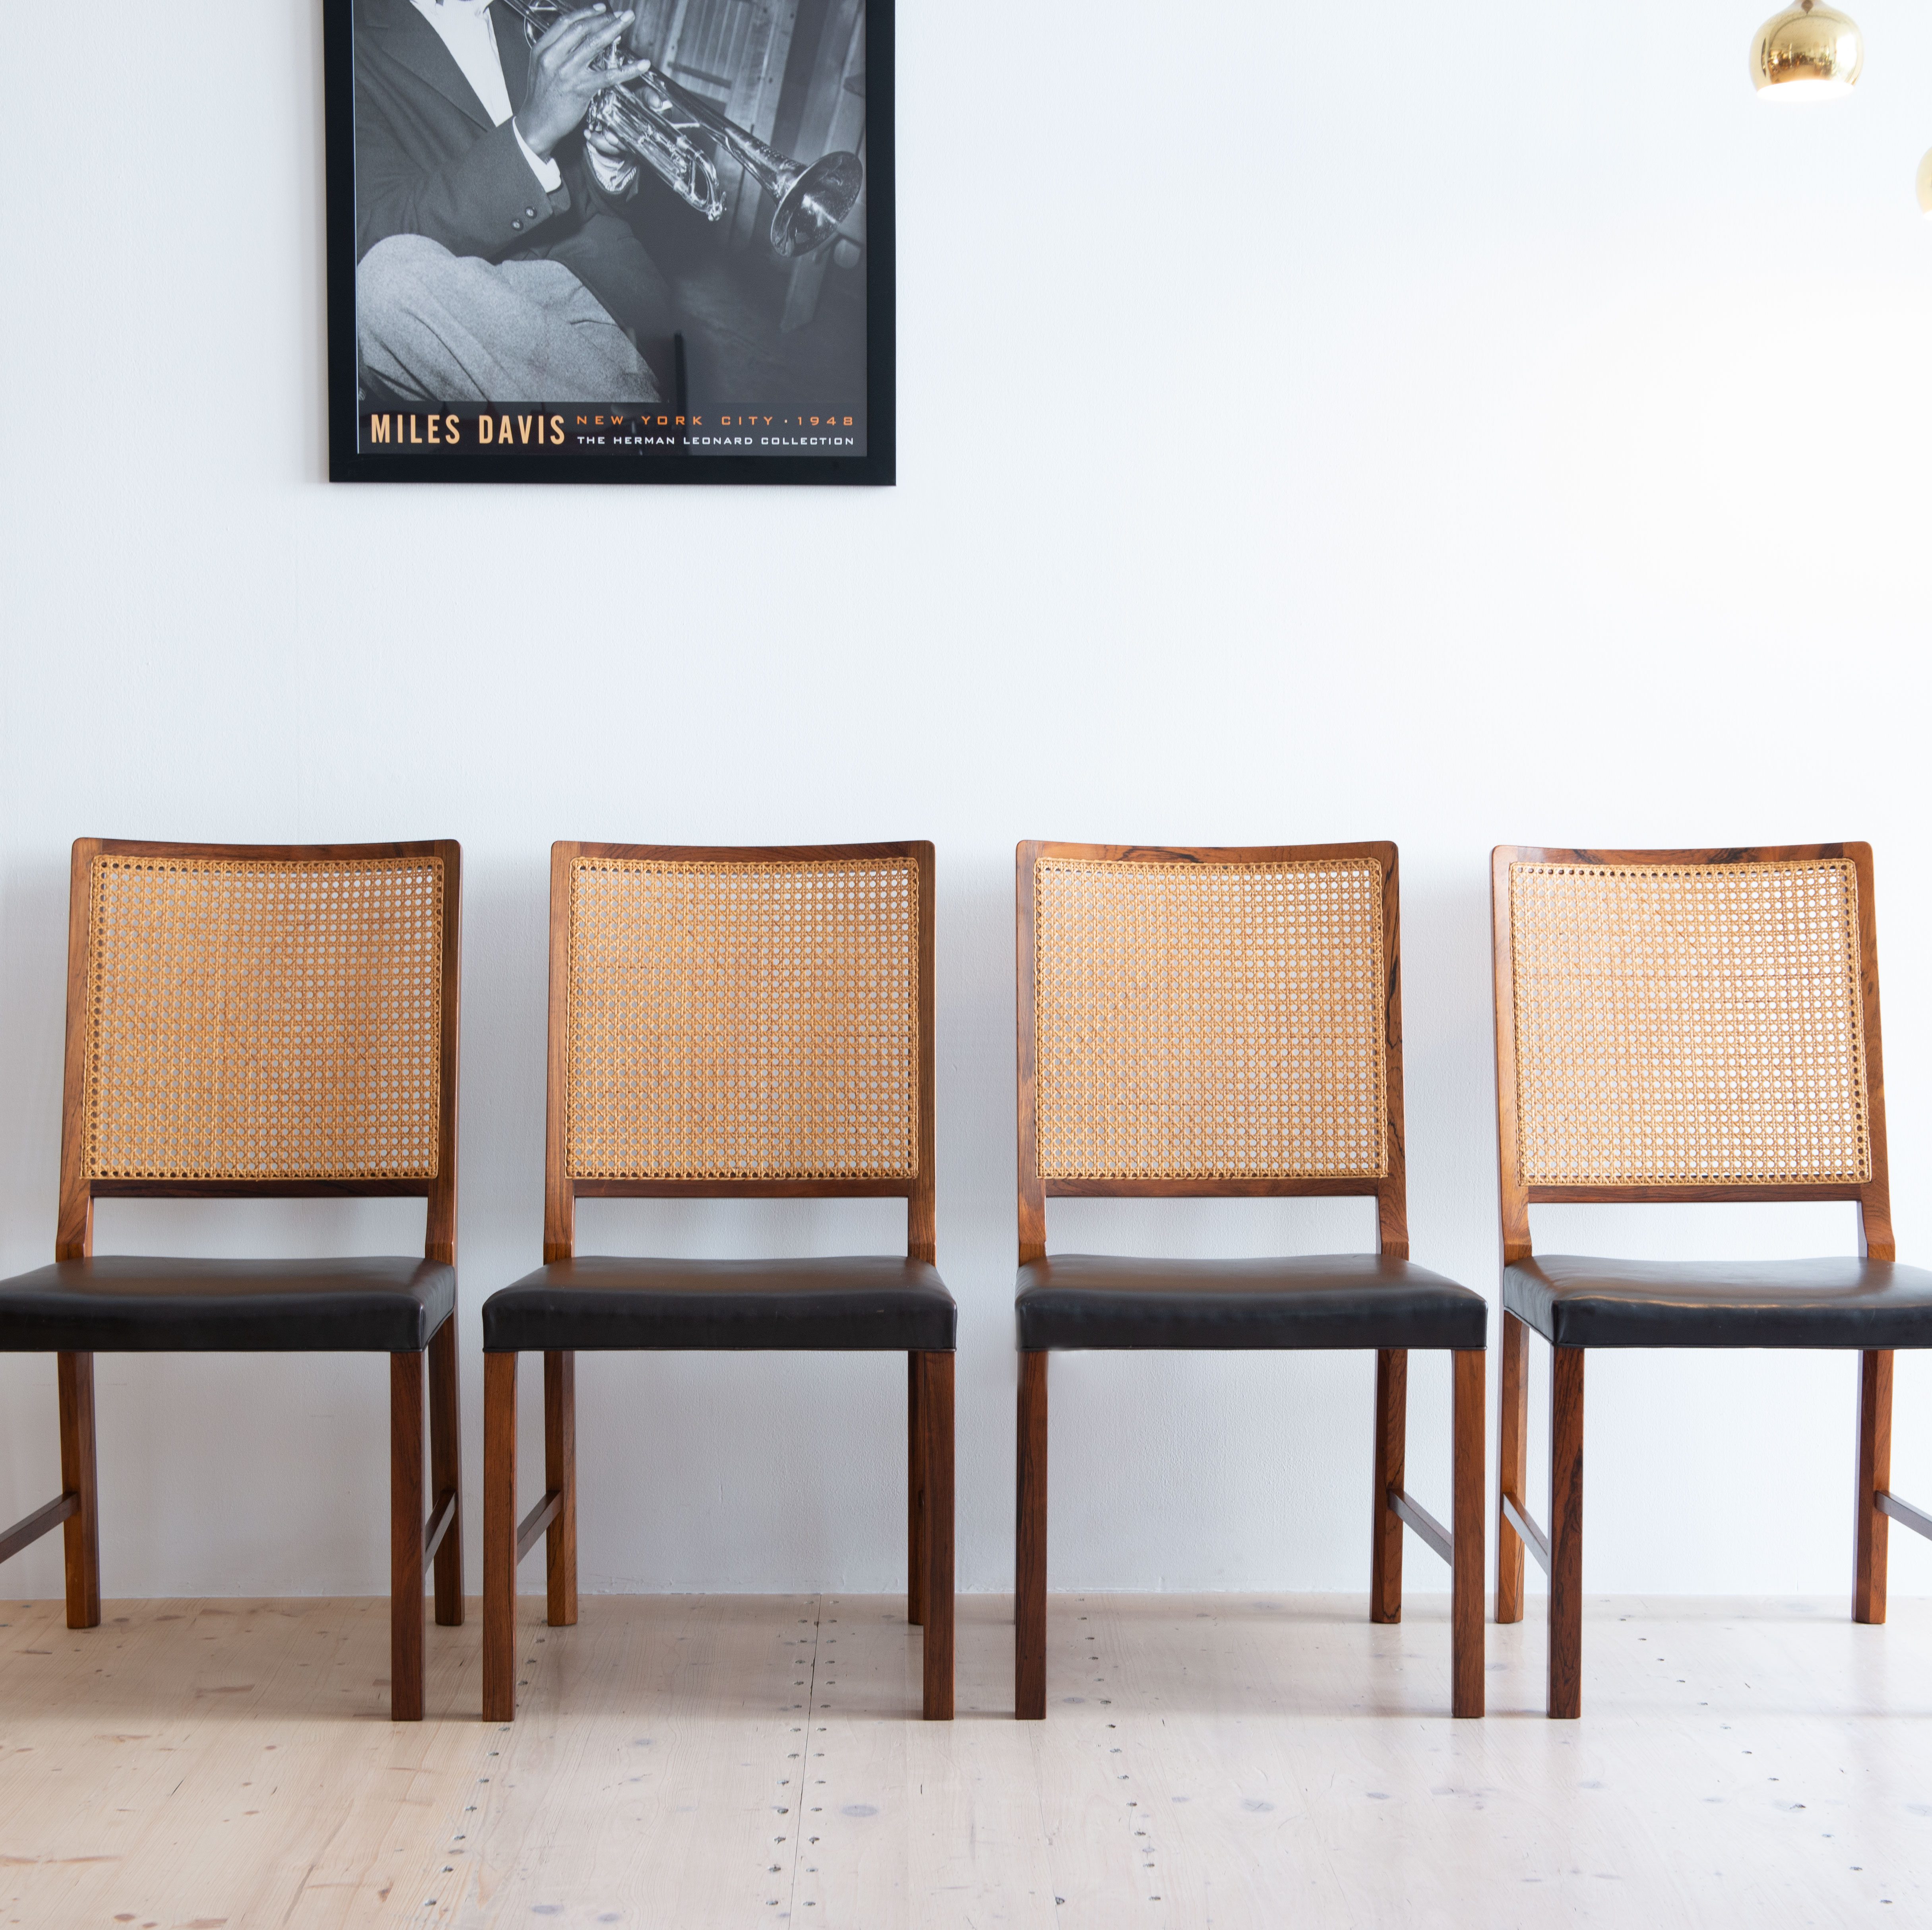 Bernt Petersen Dining Chairs in Rosewood and Black Leather. Made in Denmark in the 1960s. Available at heyday möbel, Grubenstrasse 19, 8045 Zürich, Switzerland. Mid-Century Modern Furniture and Other Stuff.